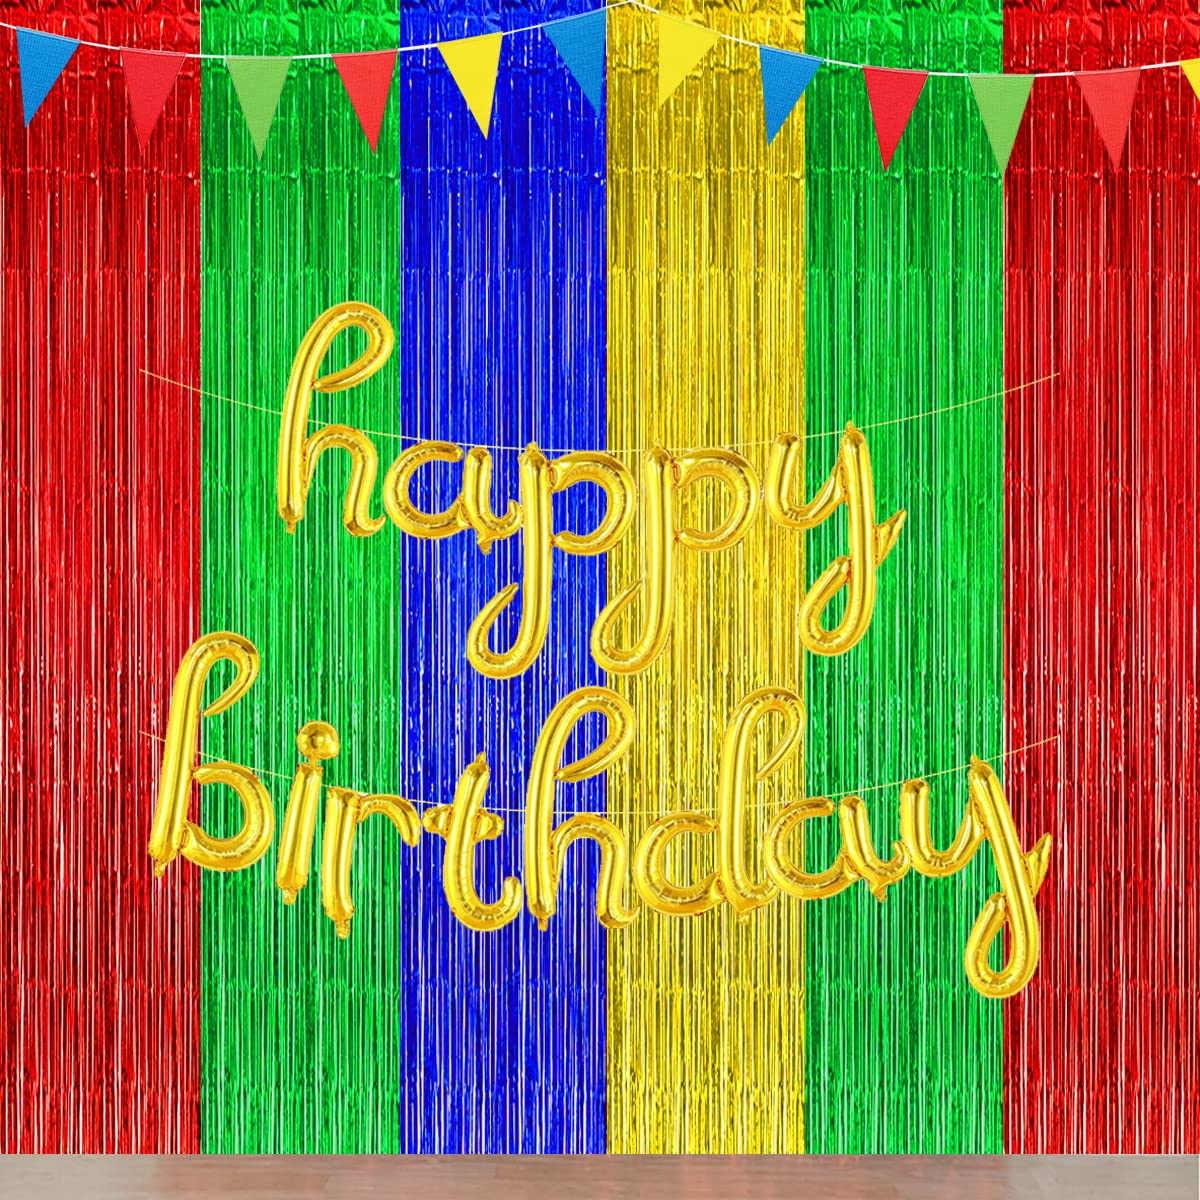 Blue Red Green Yellow Party Decorations, Blue Red Green Yellow Foil Fringe Backdrops Streamer Tinsel Curtains for Graduation Boys Girls Birthday Baby Shower Party Decor (3Pack)